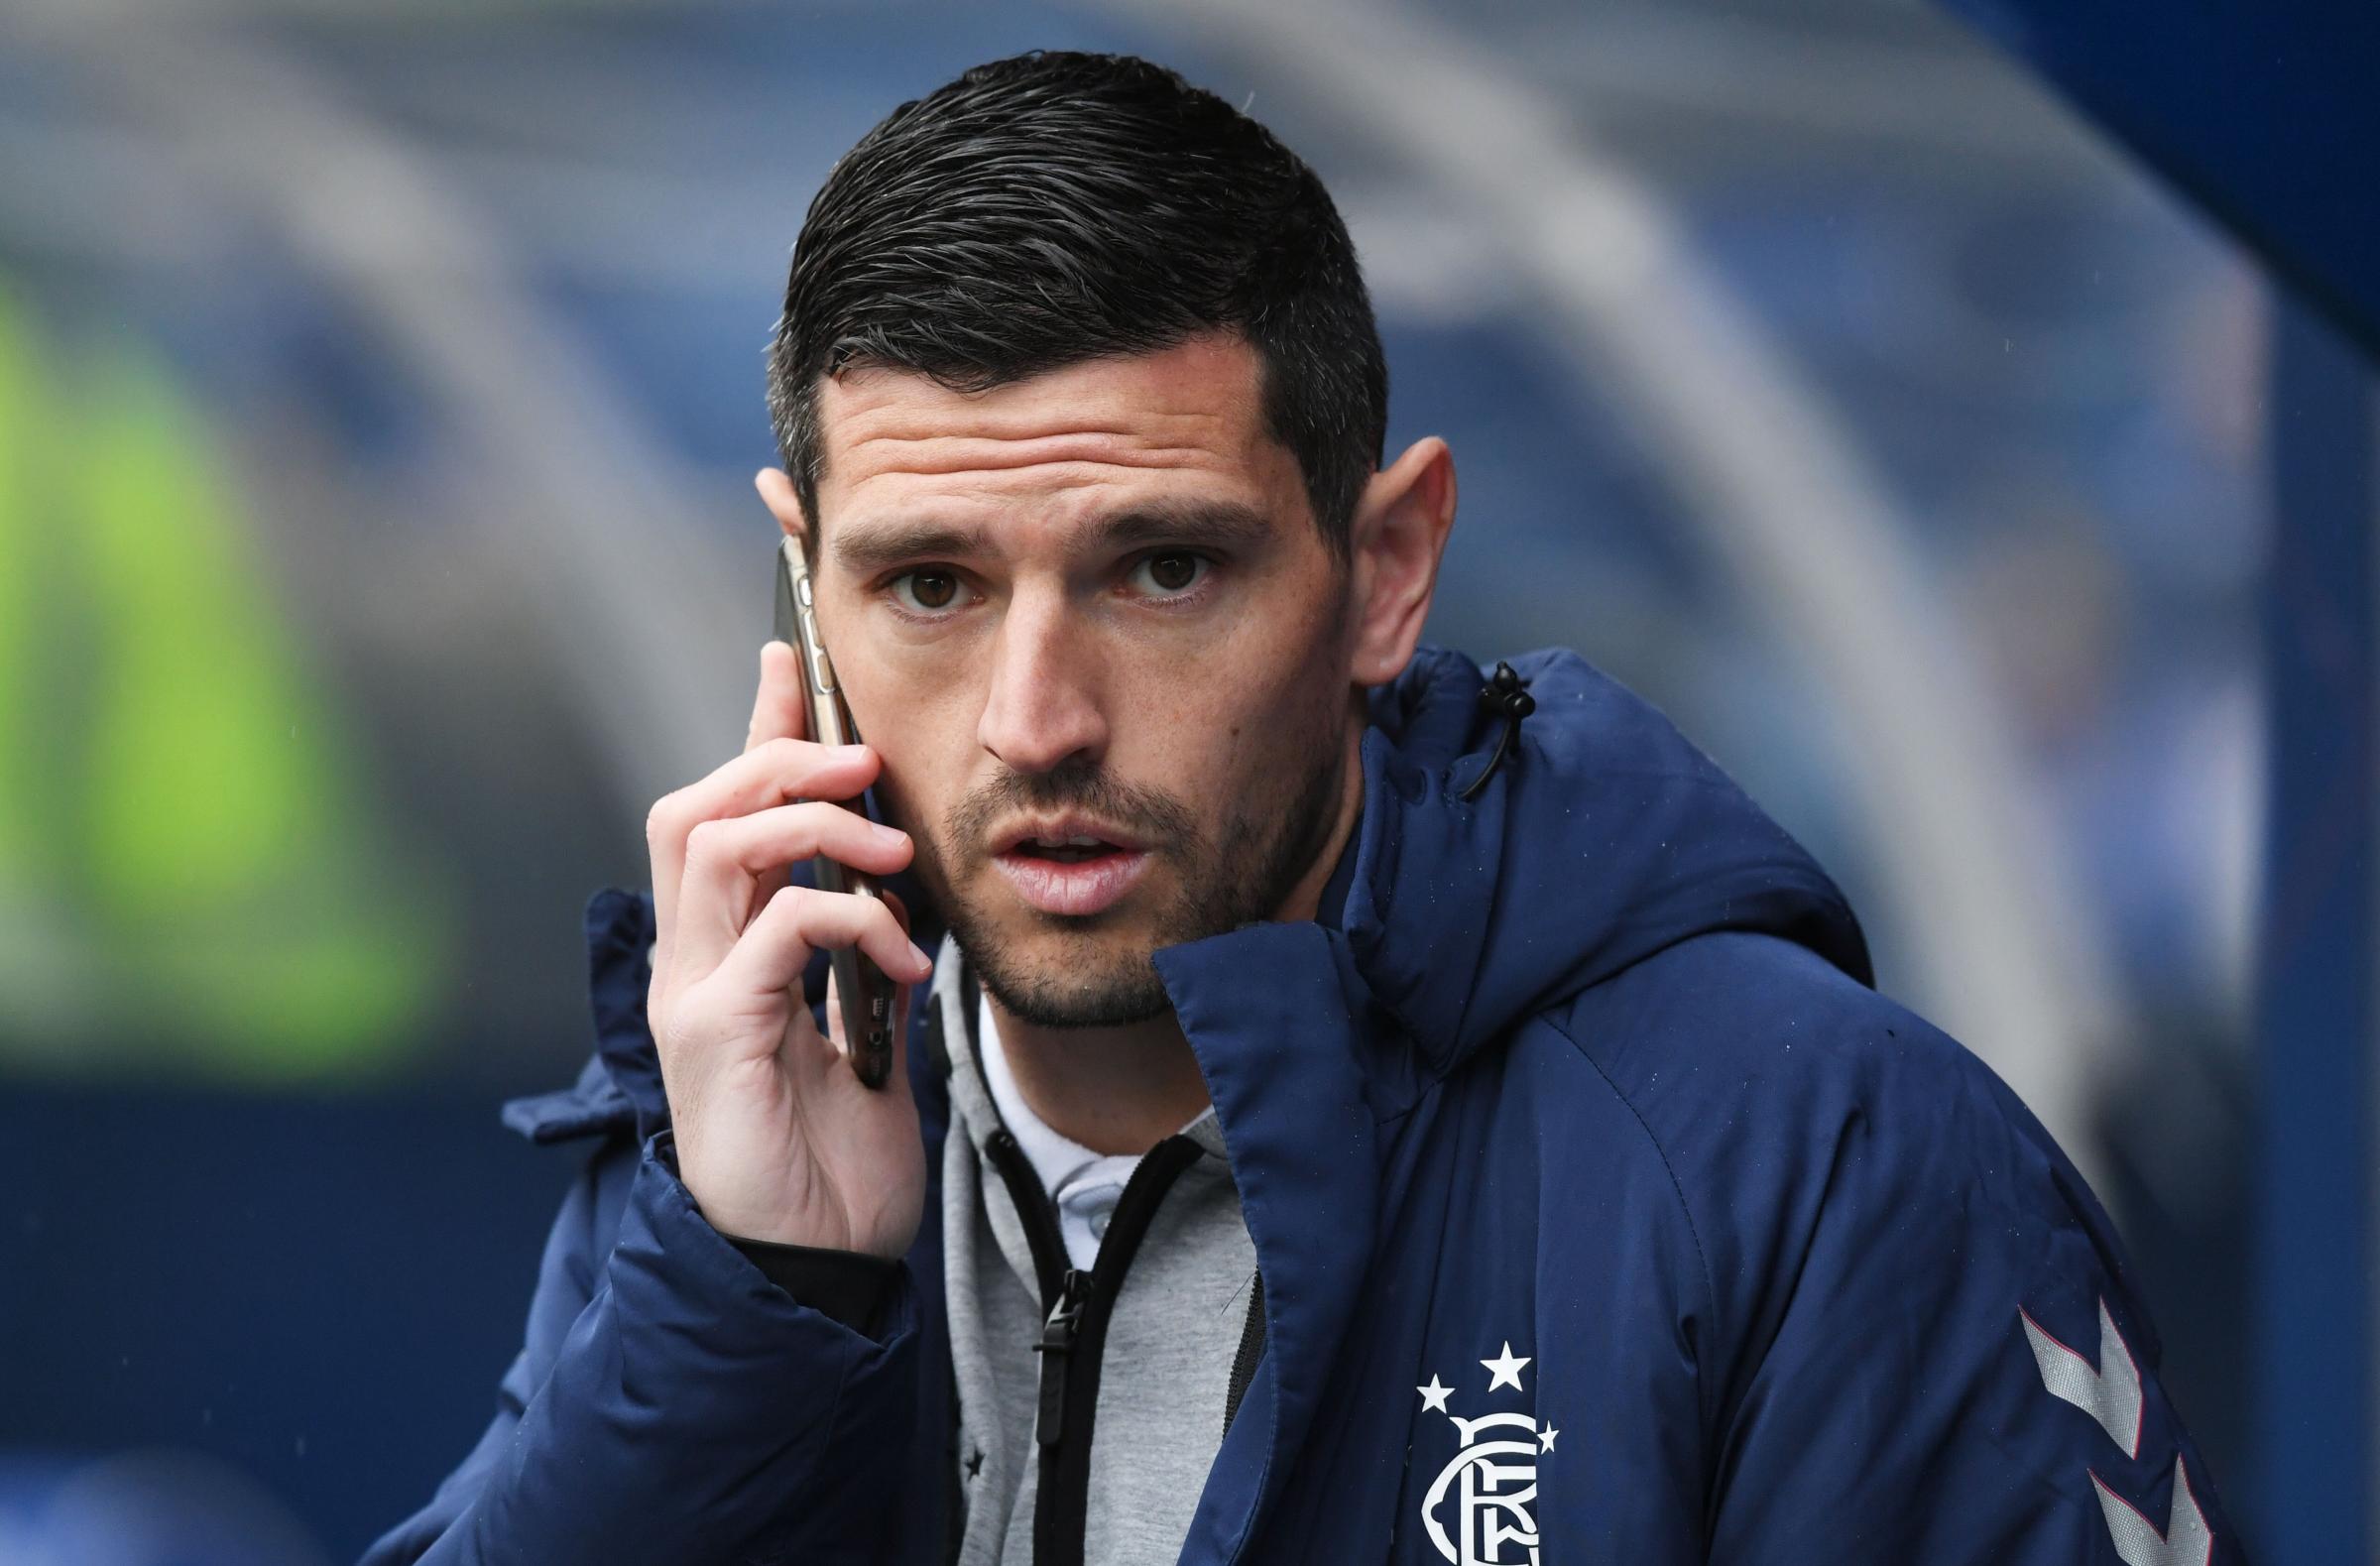 Ex-Rangers star Graham Dorrans says pals are green with envy as Sydney Derby day approaches